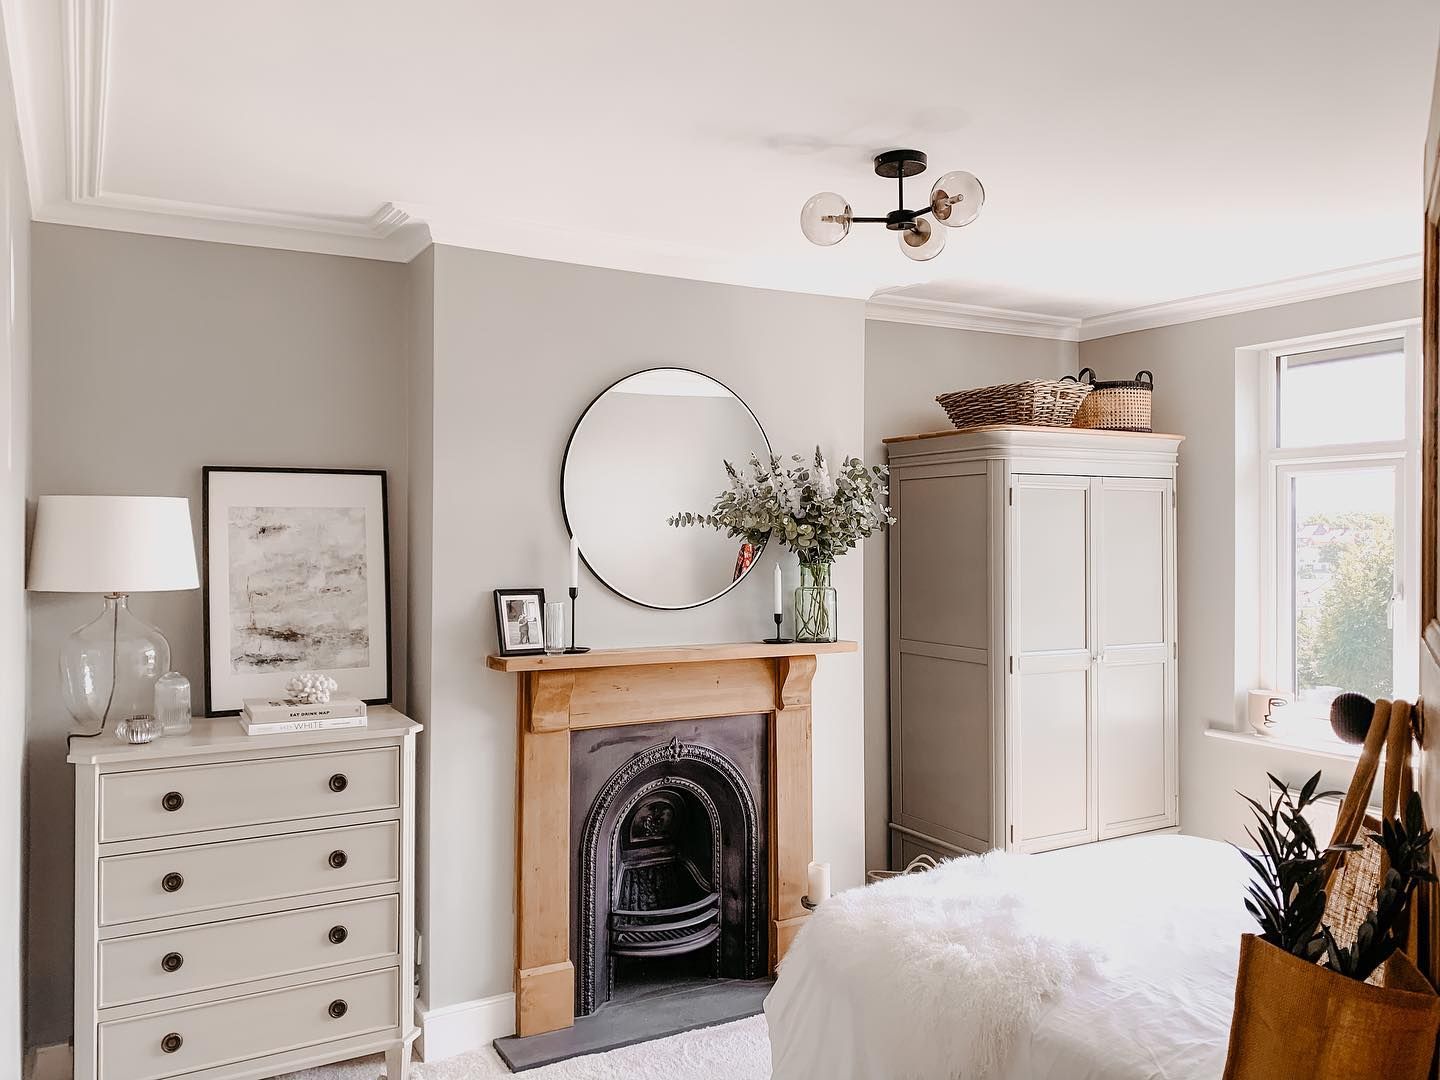 Best Wardrobes For Small Bedrooms | Oak Furnitureland Blog Within Oak Wardrobes With Drawers And Shelves (View 12 of 15)